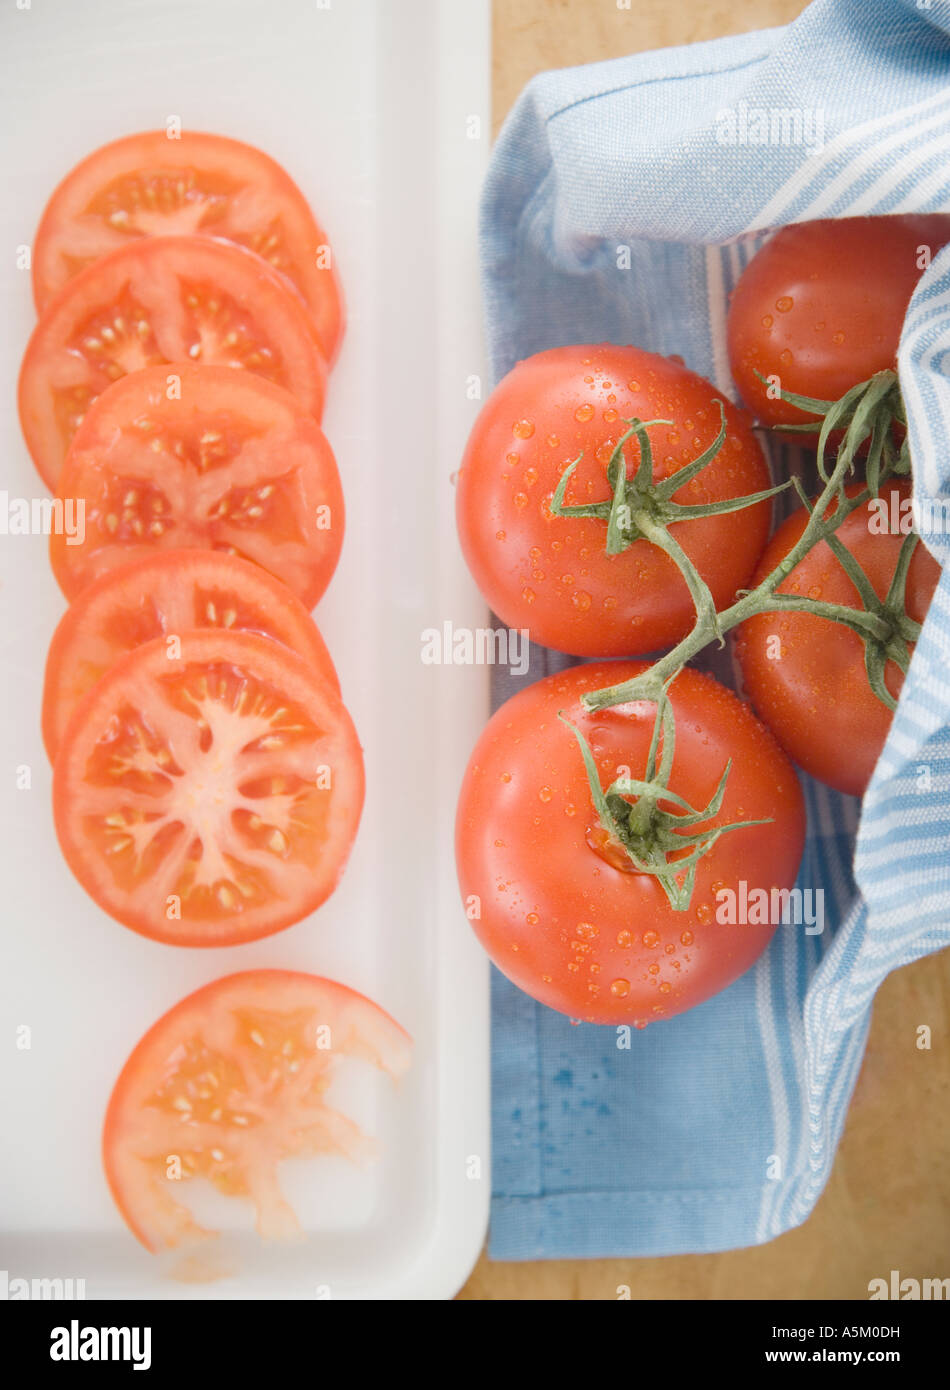 Sliced tomatoes on cutting board Stock Photo